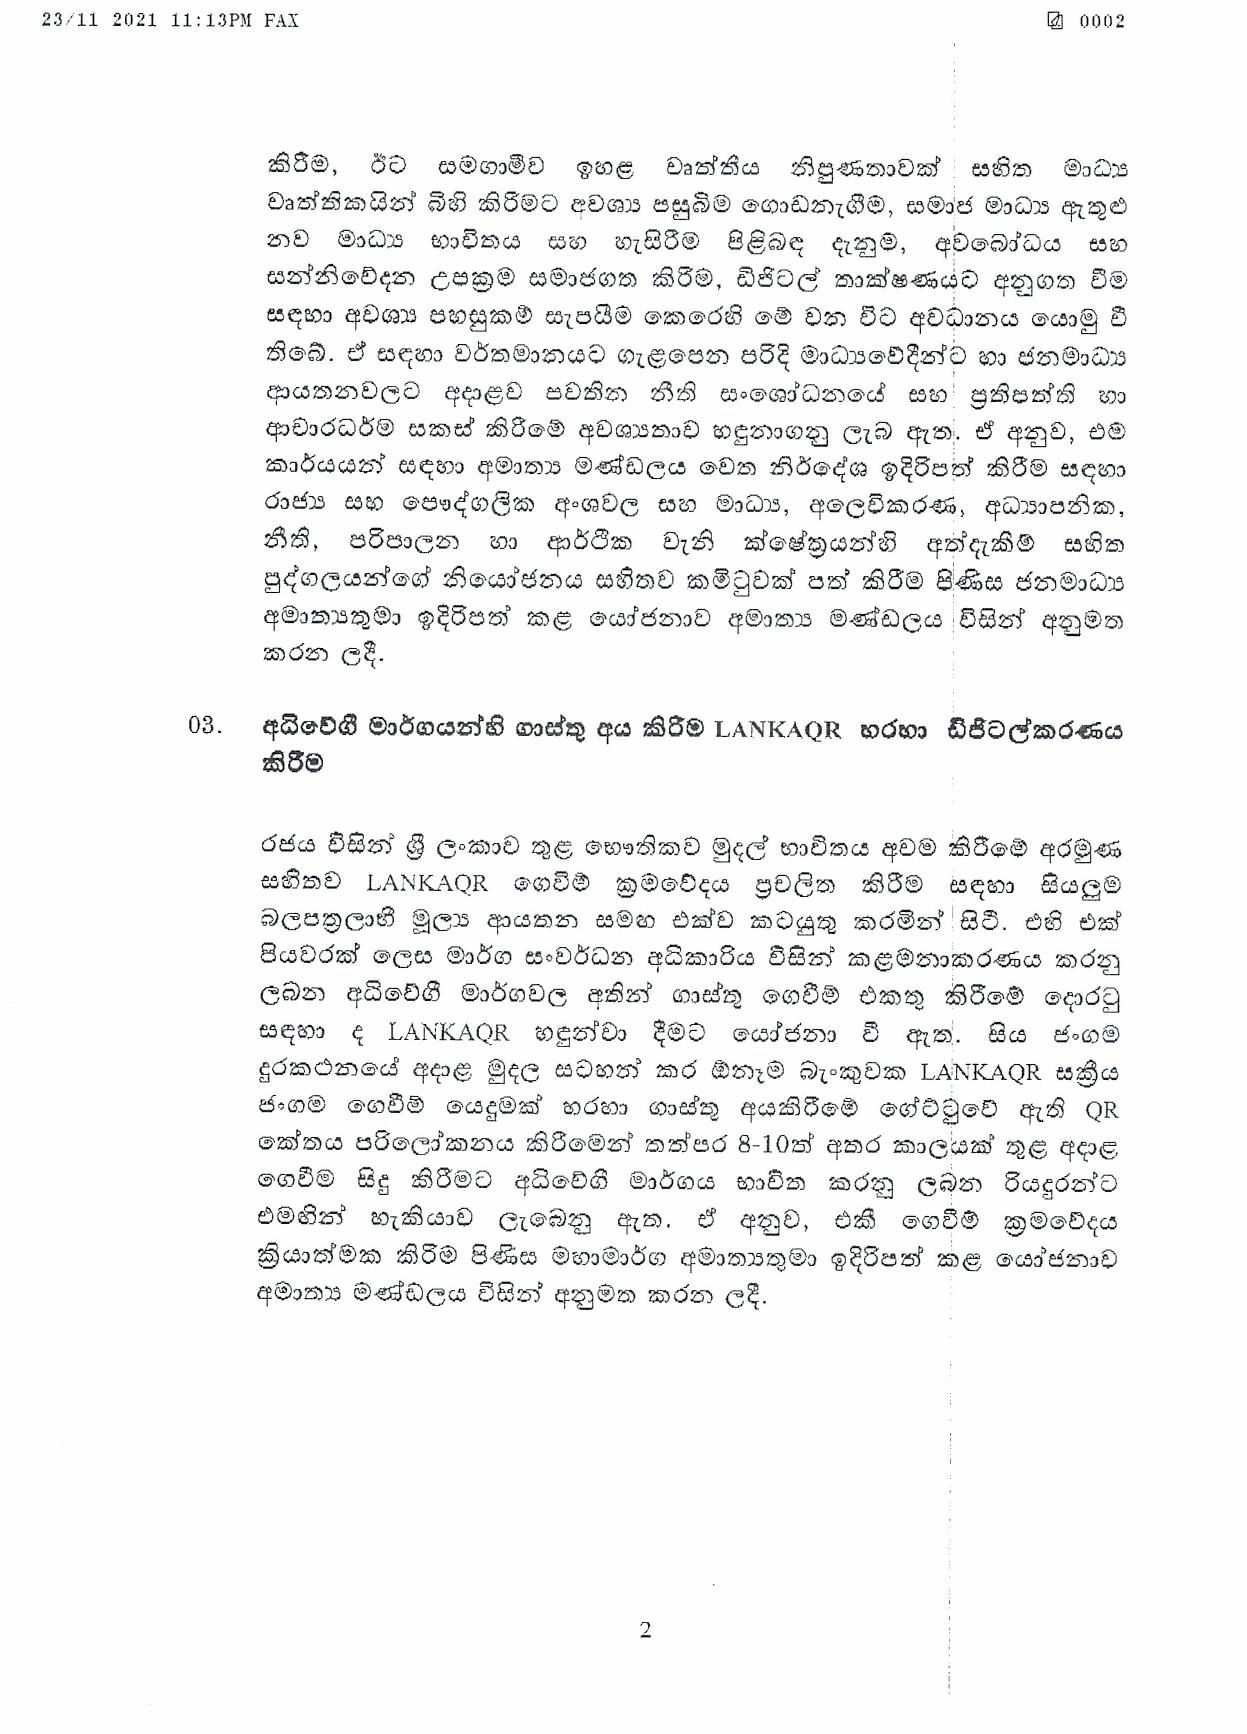 Cabinet Decision on 23.11.2021 page 002